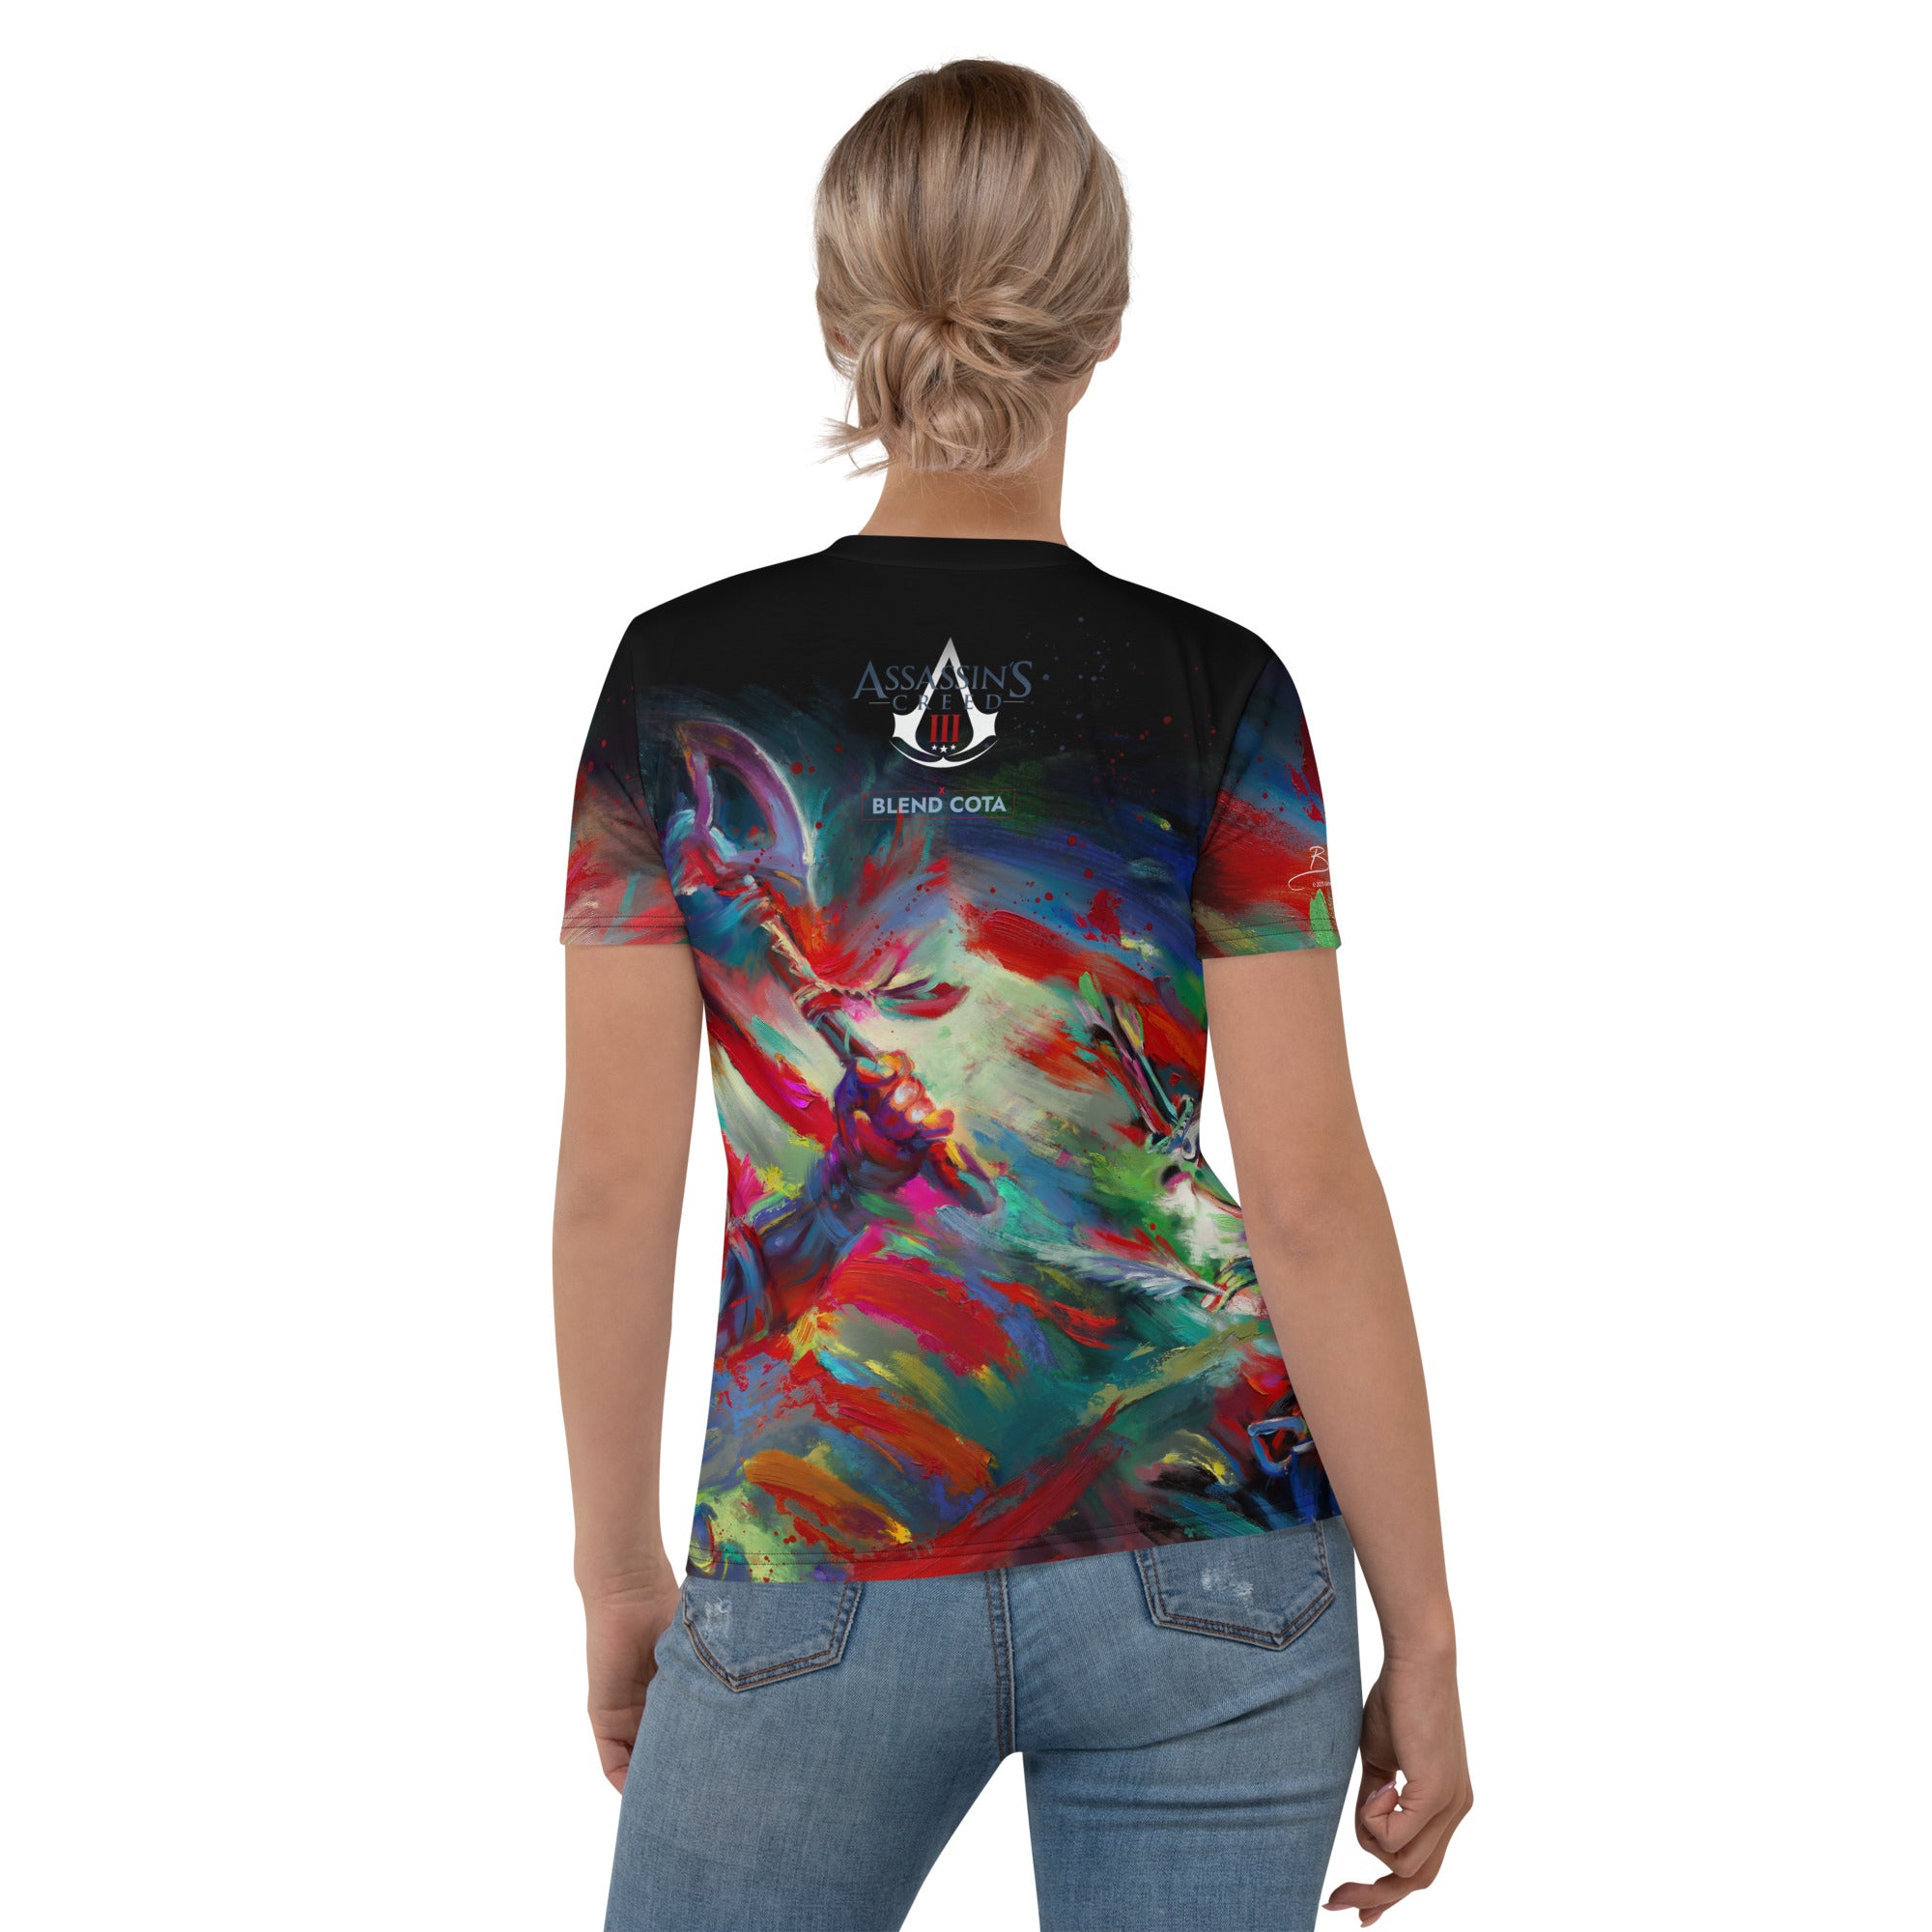 Connor Kenway Assassin's Creed on a women's t shirt.